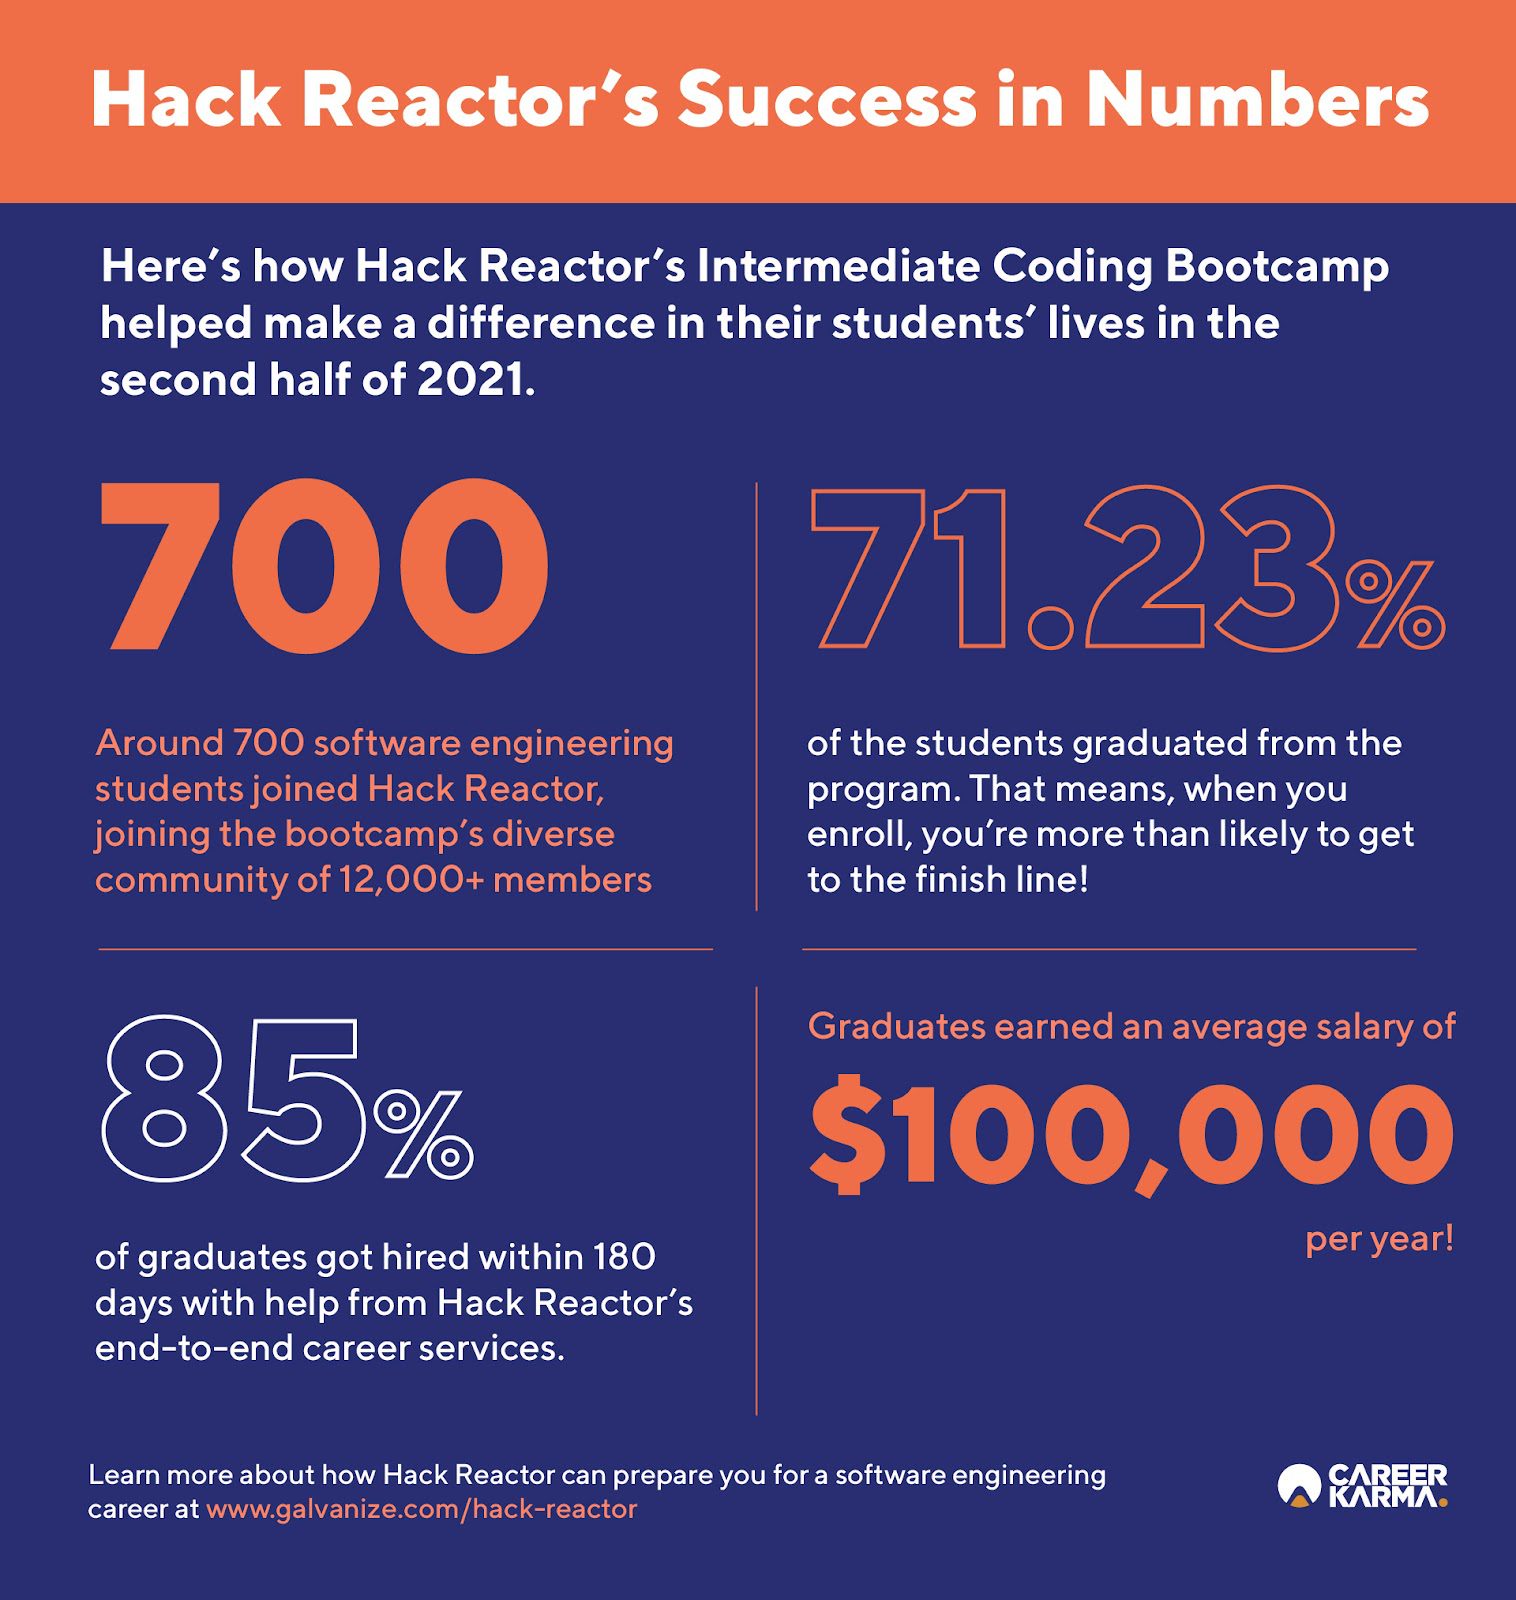 An infographic showing 2021 student outcomes from Hack Reactor’s Intermediate Coding Bootcamp